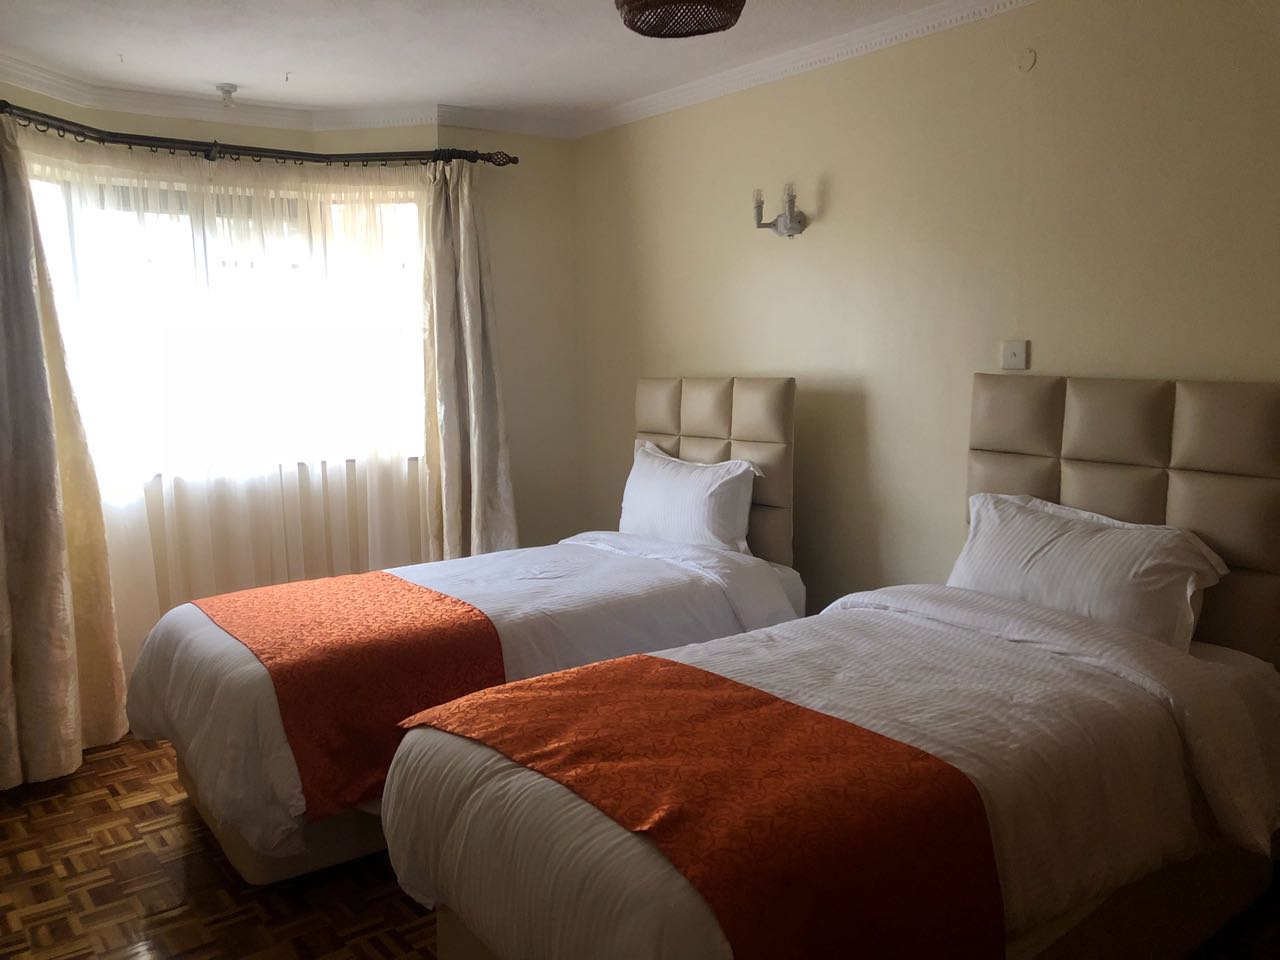 3 Bedroom Fully Furnished Apartment Located in Kilimani, Off Lenana Road, To Let at Ksh150k (3)